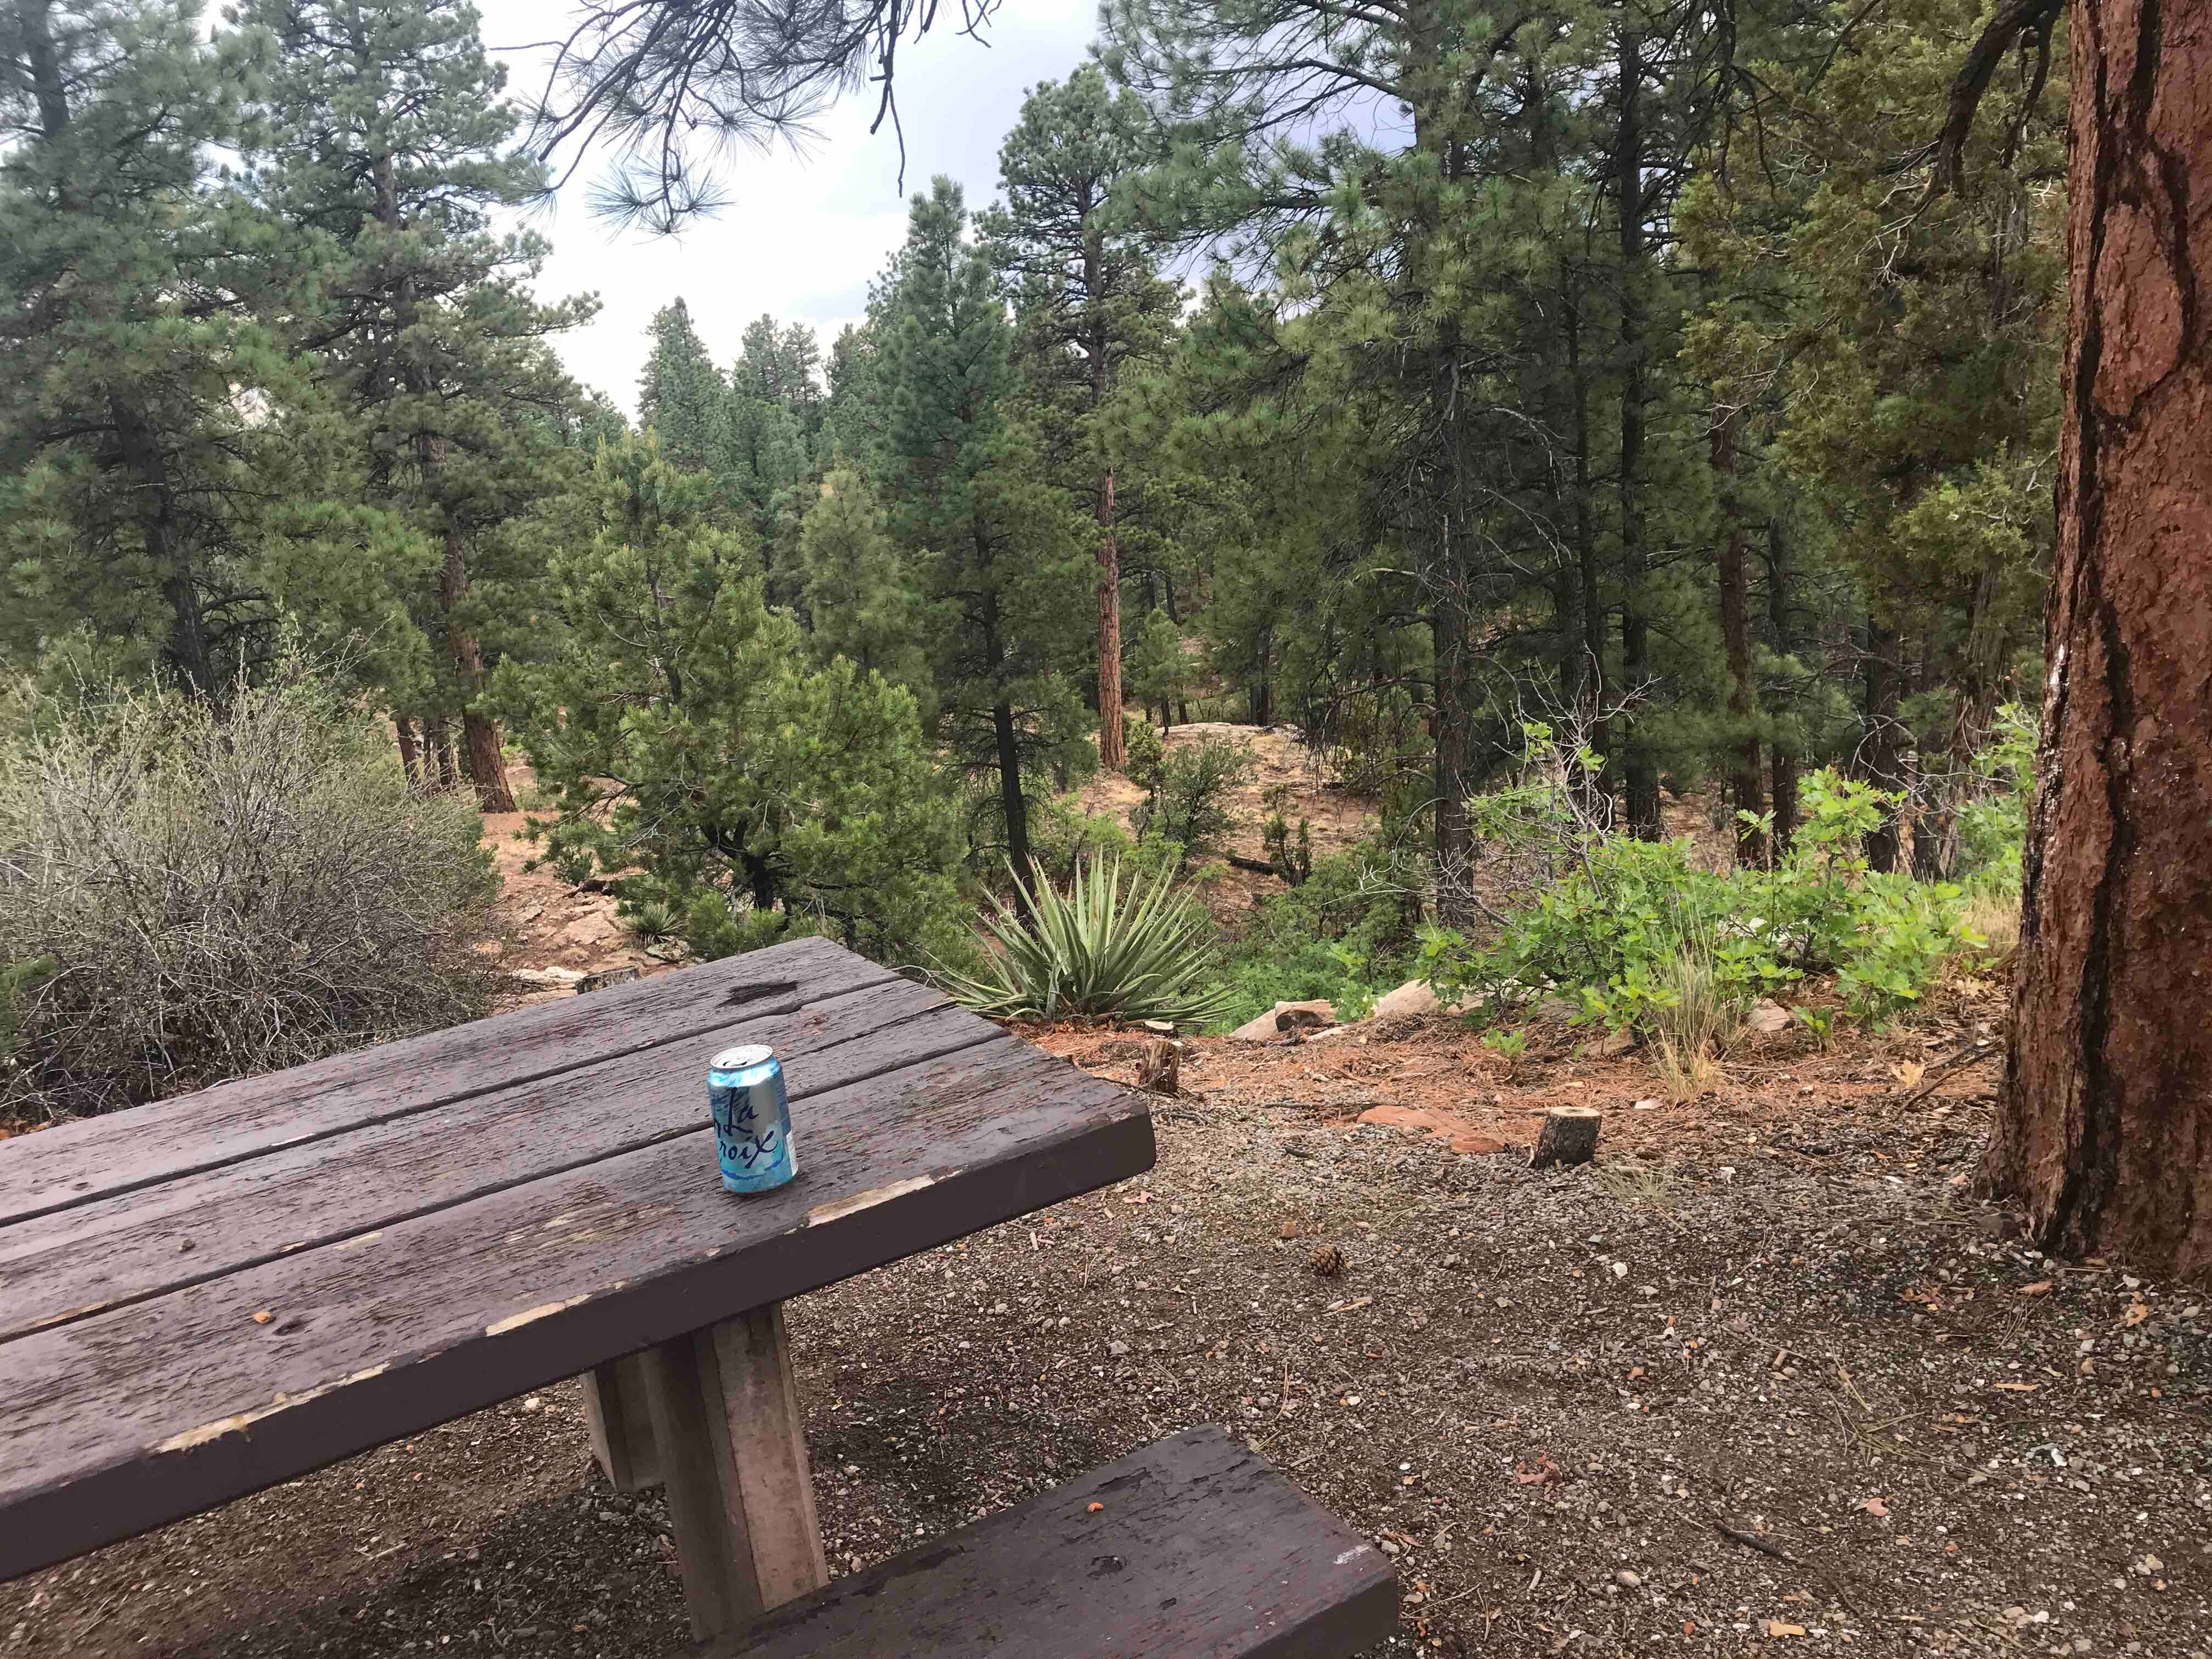 Camper submitted image from Devils Canyon Campground - 4